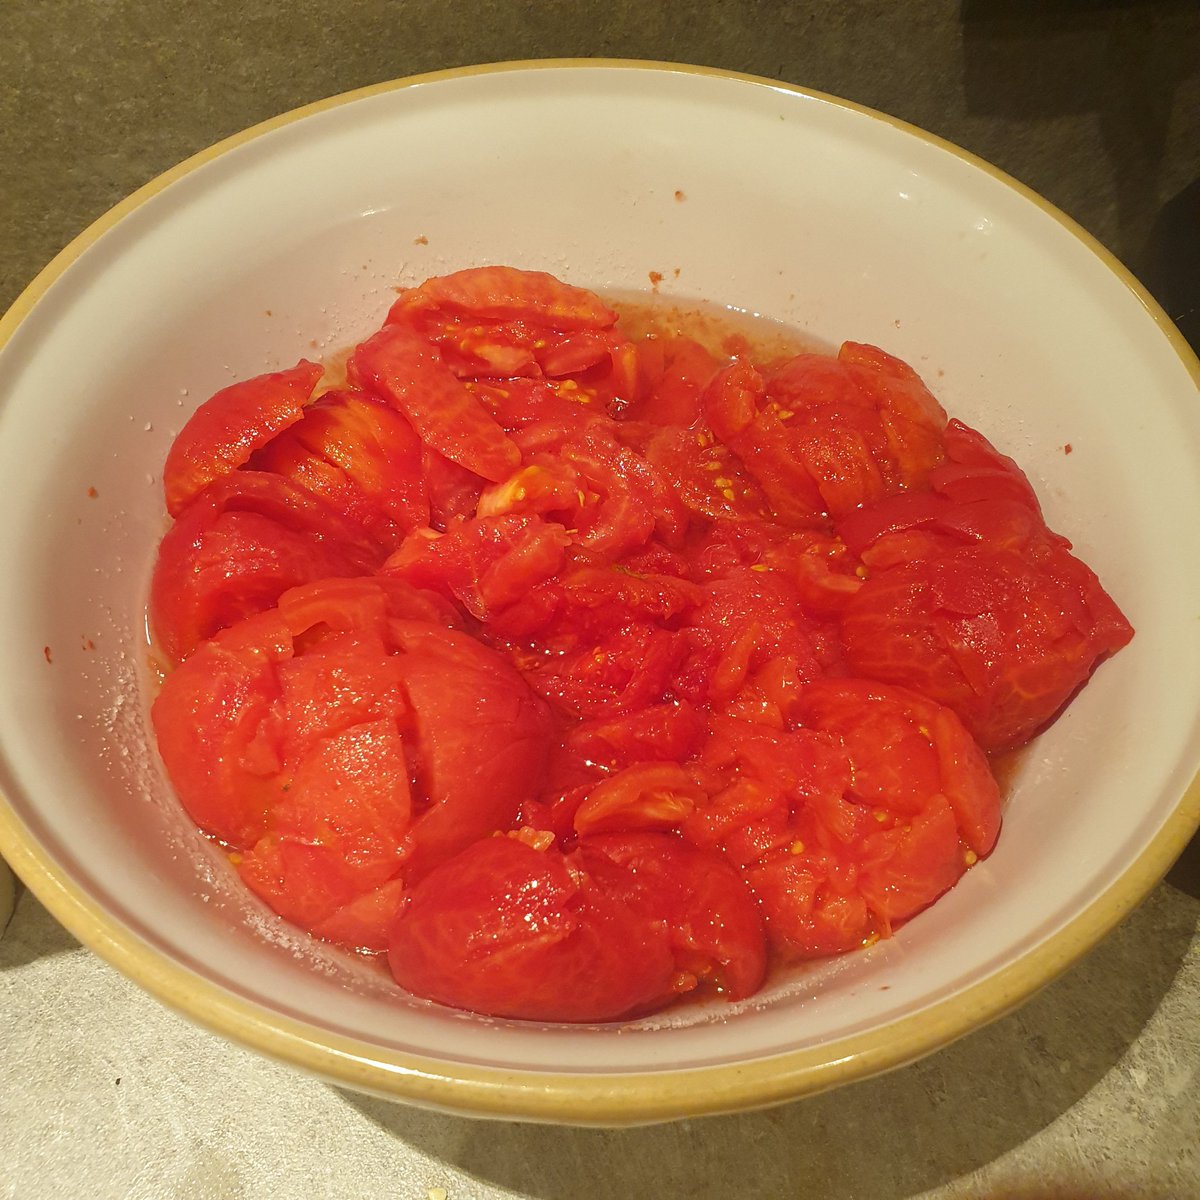 tomatoes look like this nowonions look like this nowcombinemix and salt top liberally. heat to just enough to get a simmer